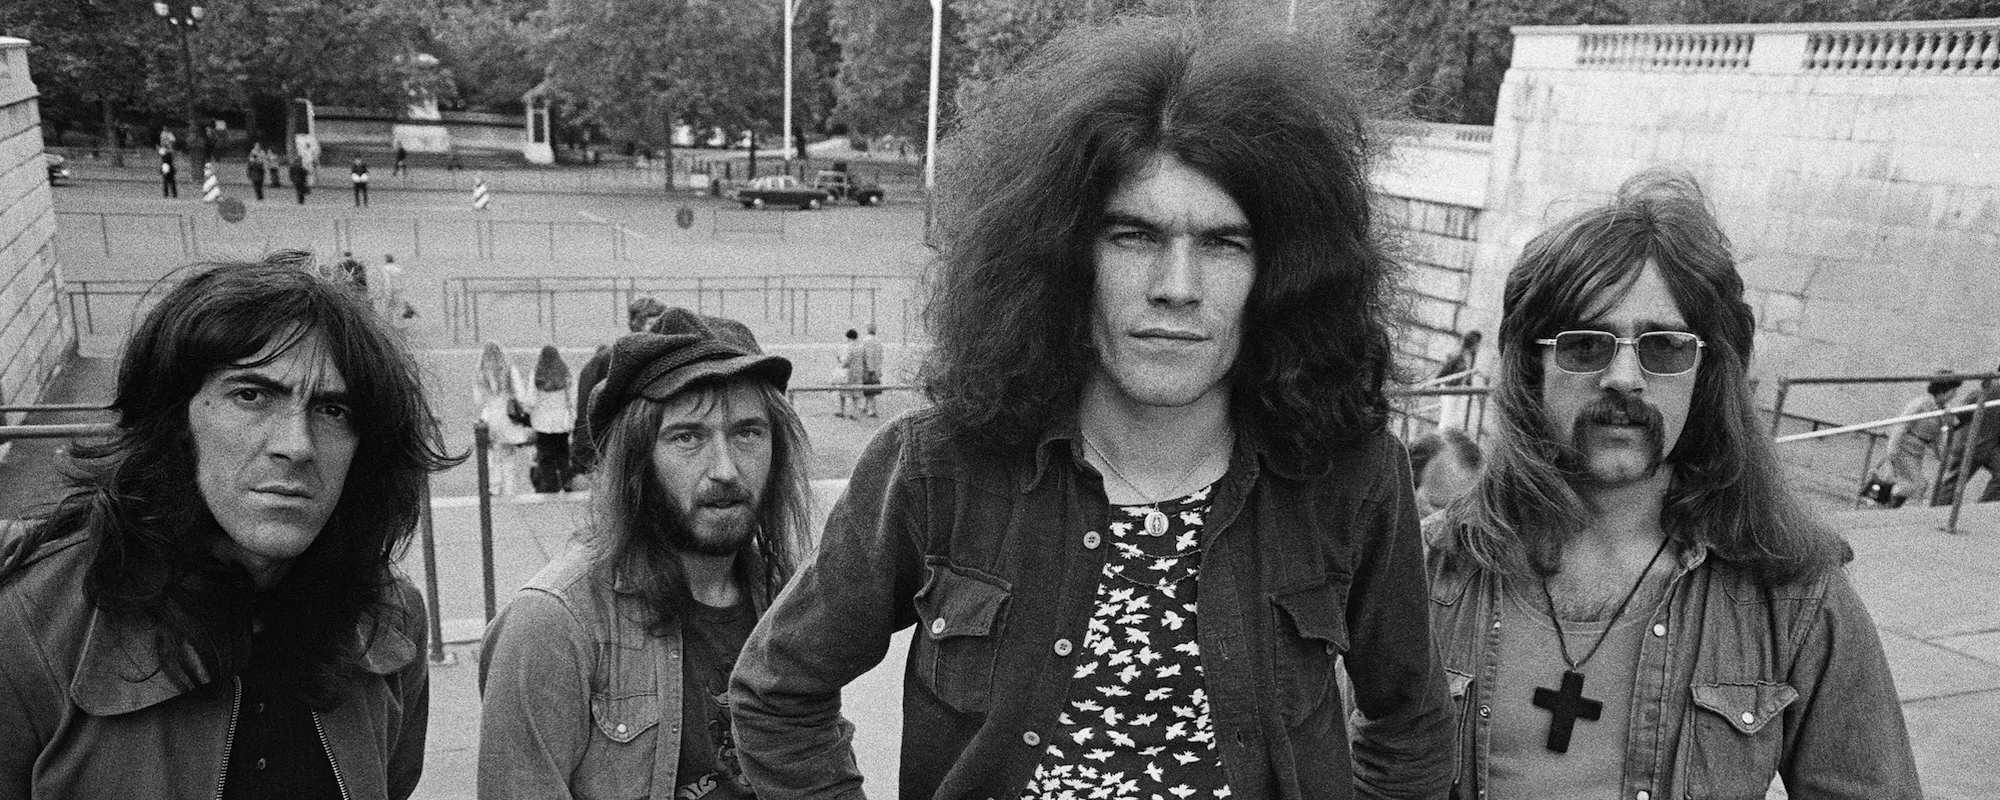 The Meaning Behind Nazareth’s “Hair of the Dog” That Never Involved a Hangover Cure